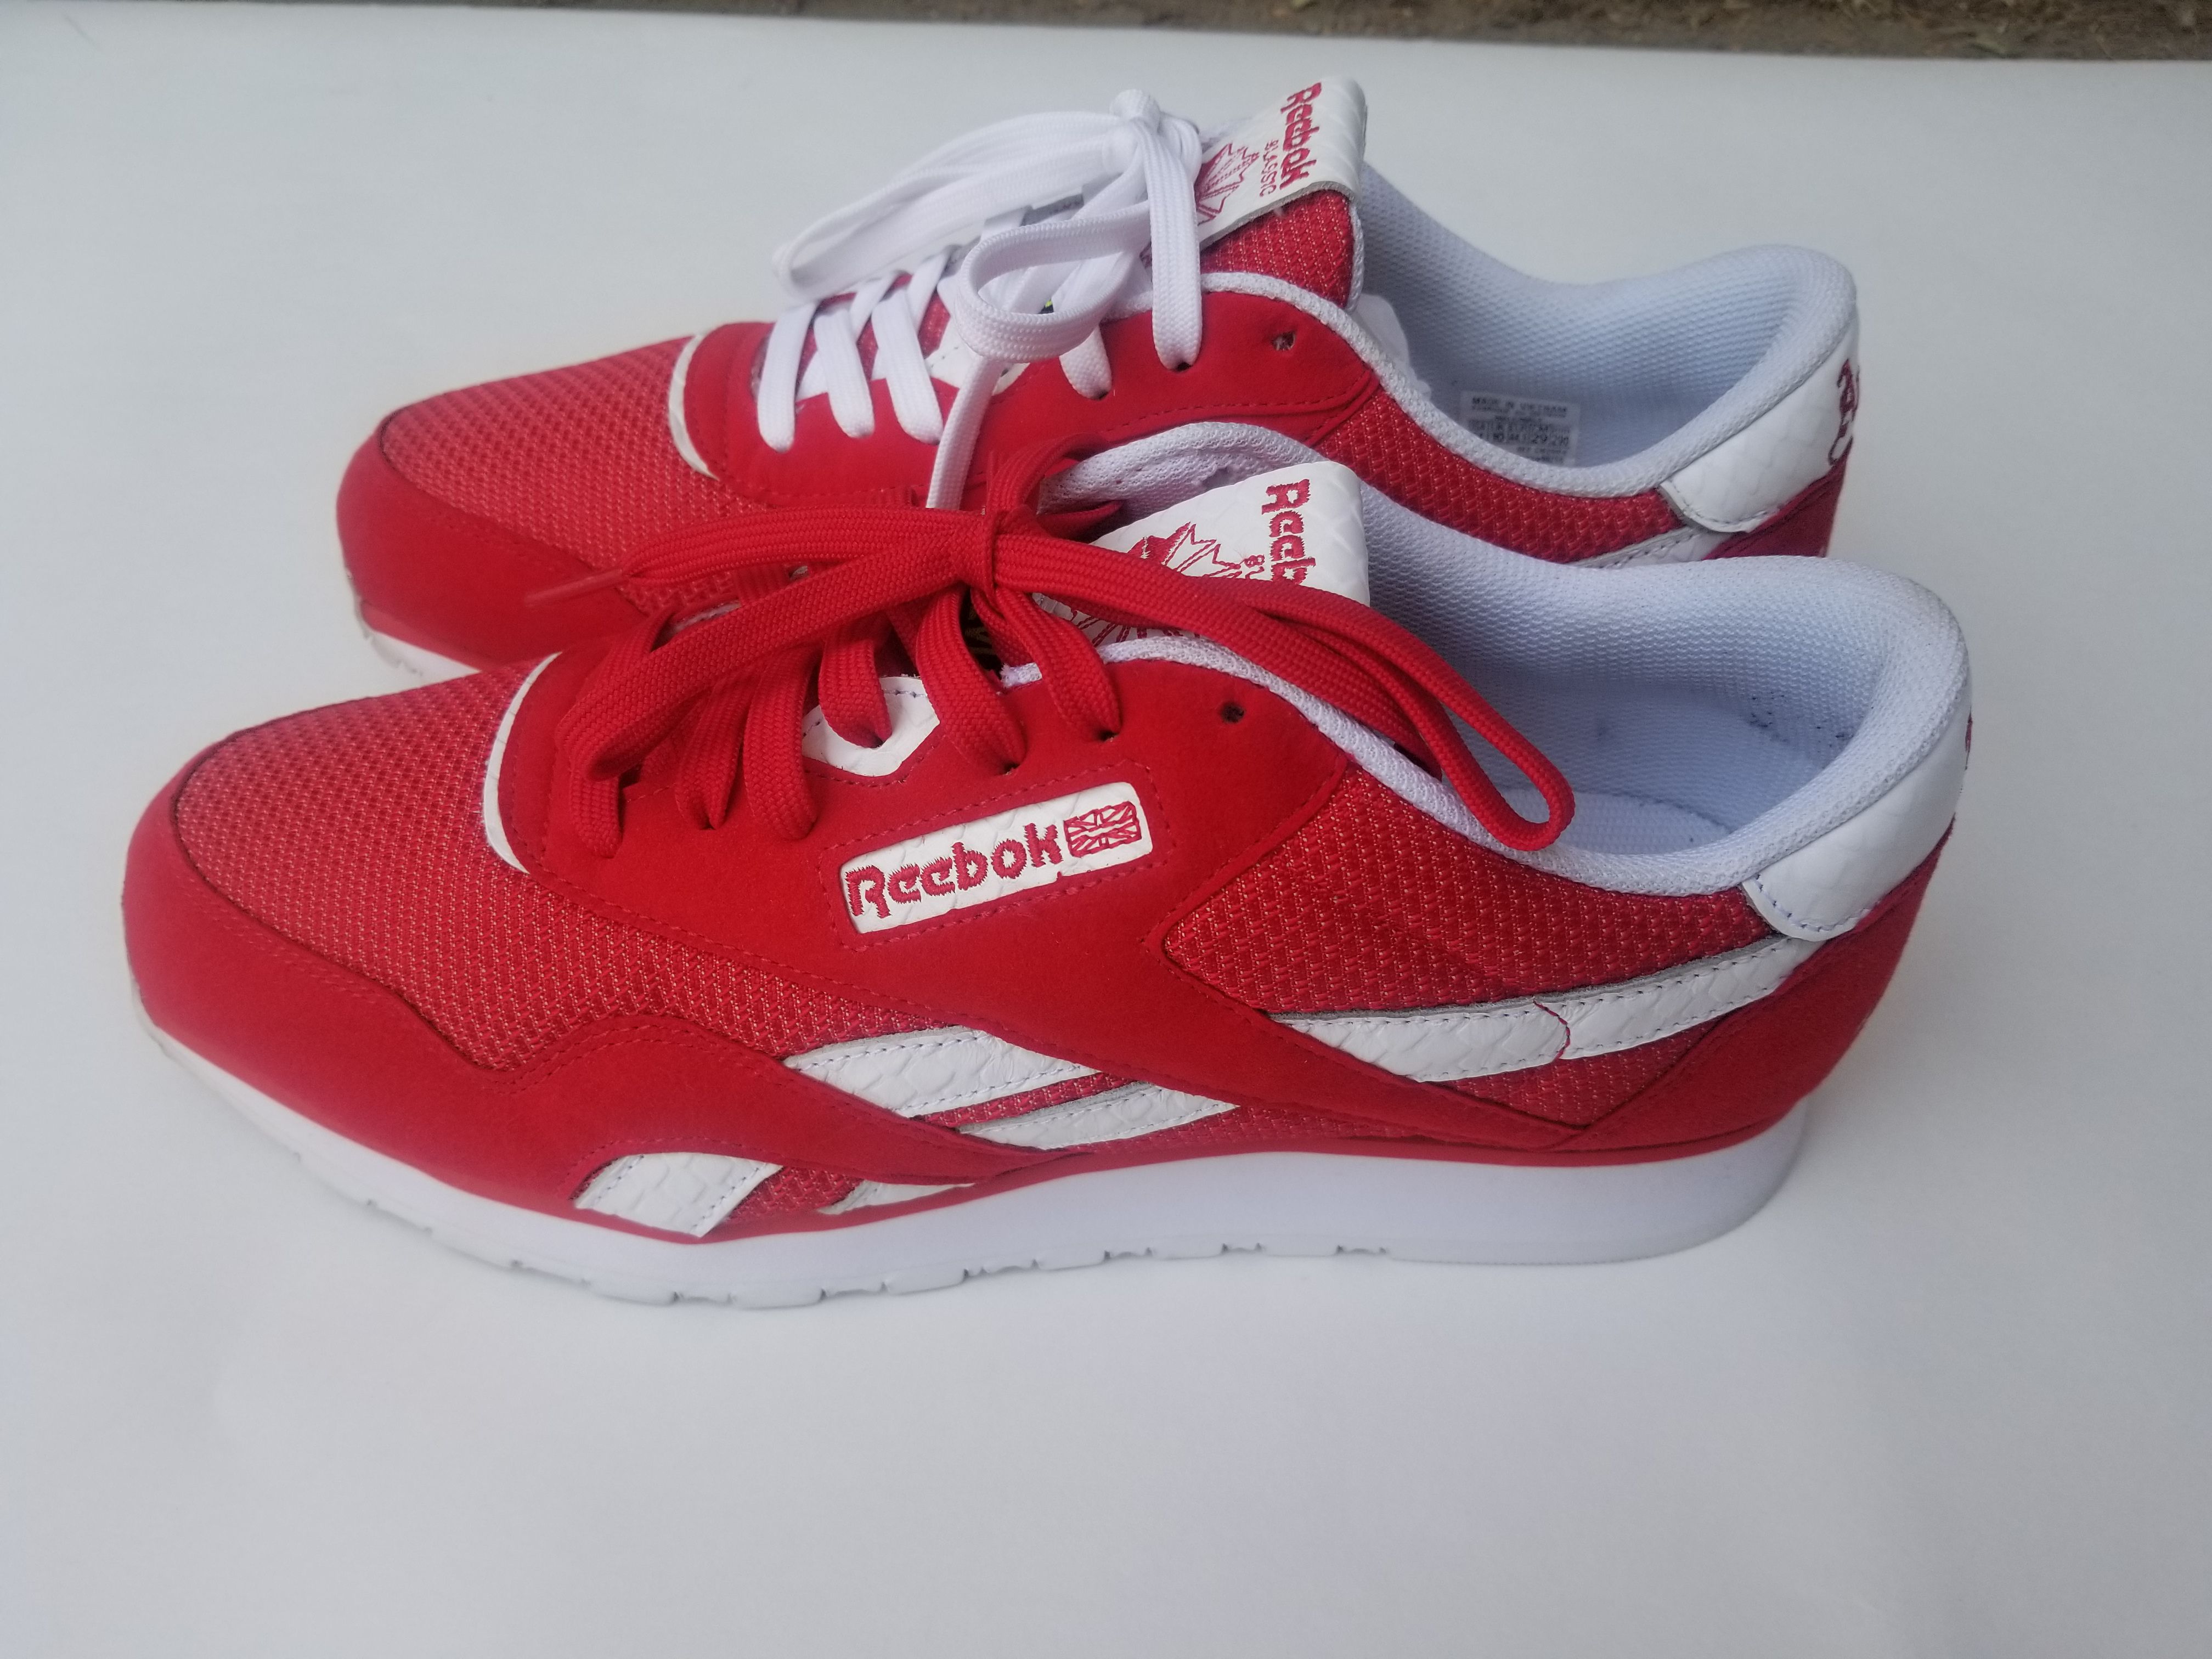 Reebok 4Hunnid 400 Bait x YG Classic Nylon Red Blassik Men's Shoes Size 11 Sale in Los Angeles, CA - OfferUp